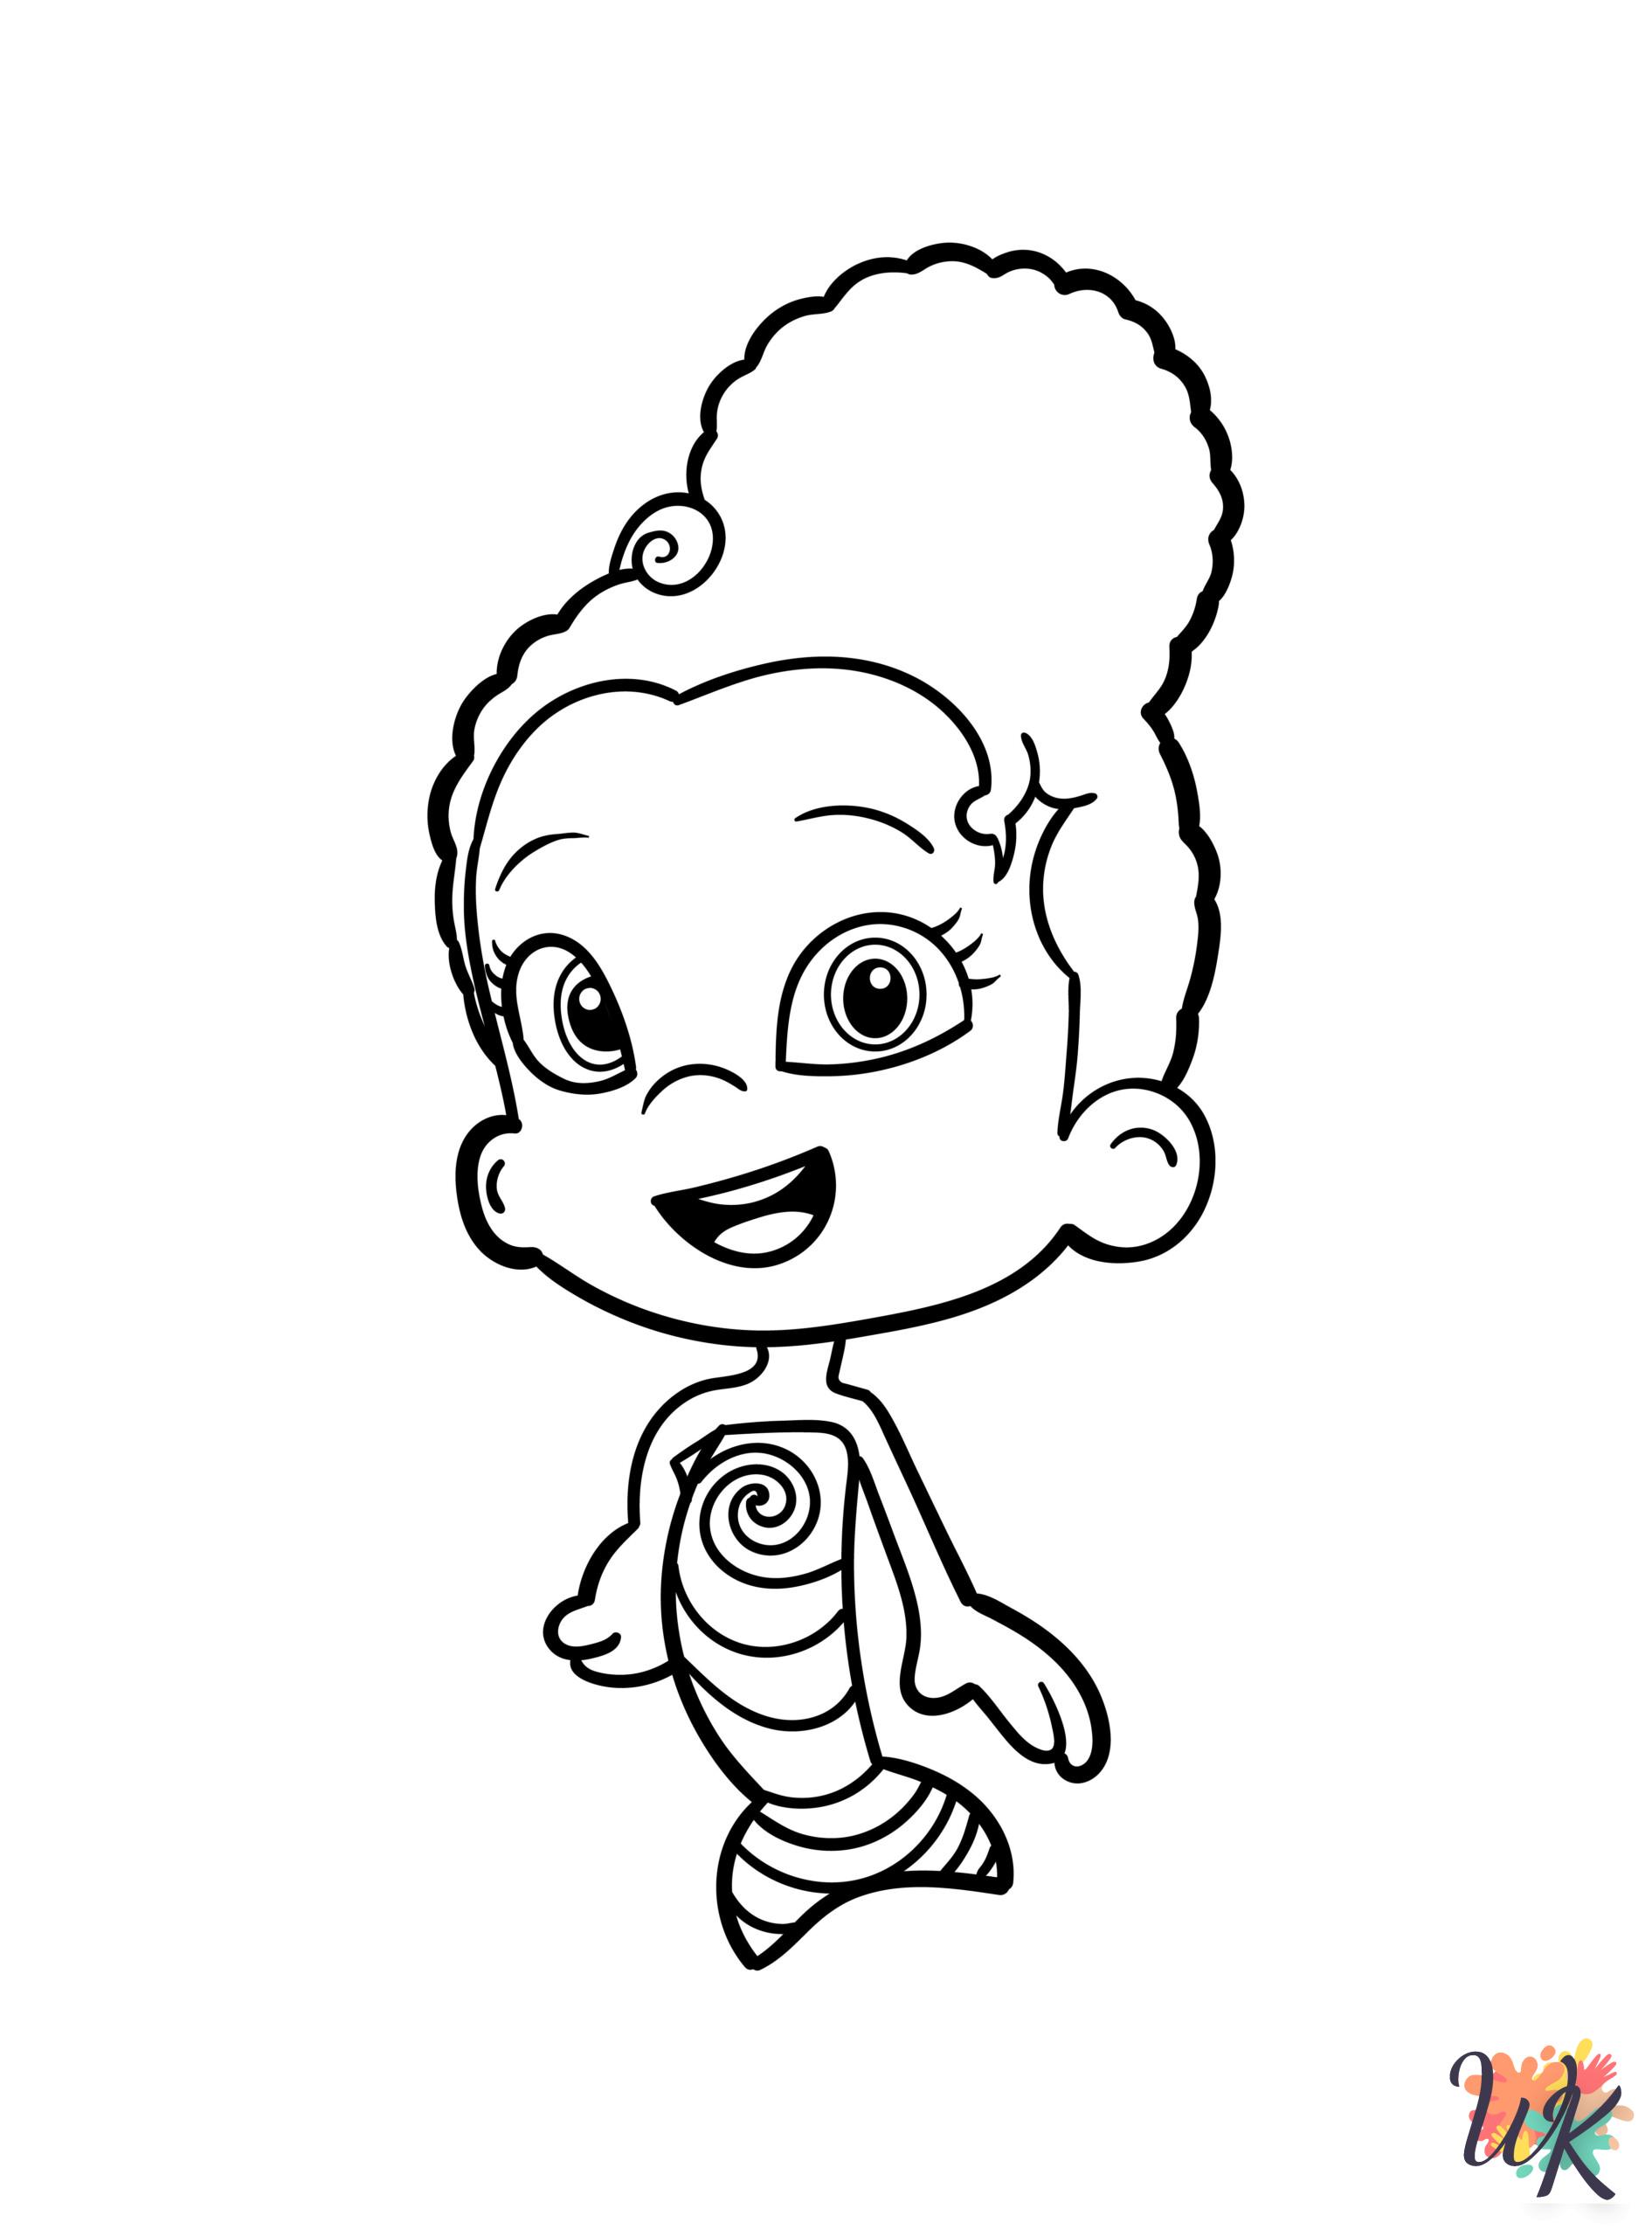 Bubble Guppies coloring pages printable free